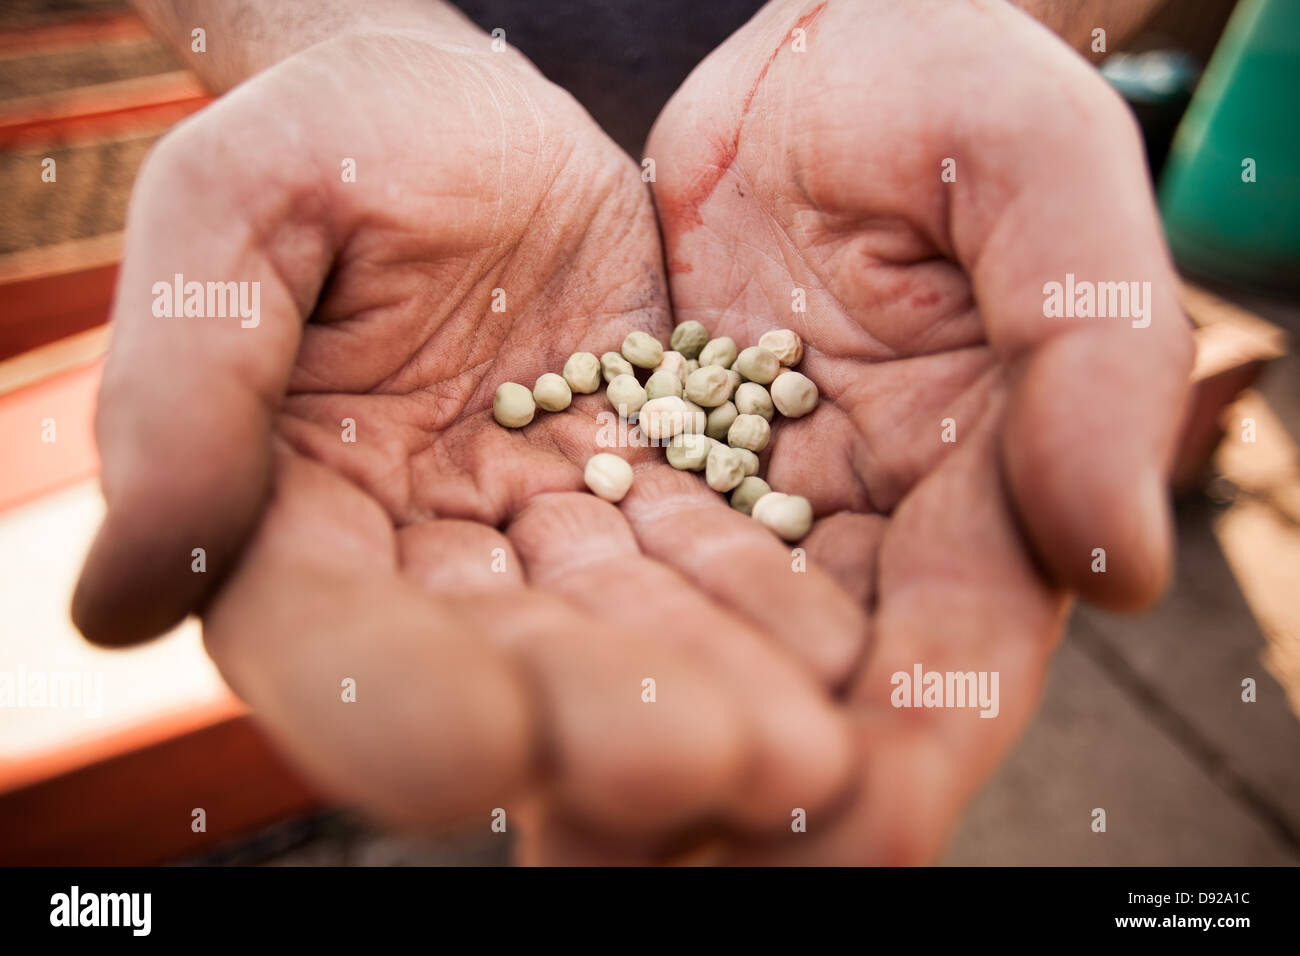 gardening - a man holds vegetable seeds in his hands Stock Photo